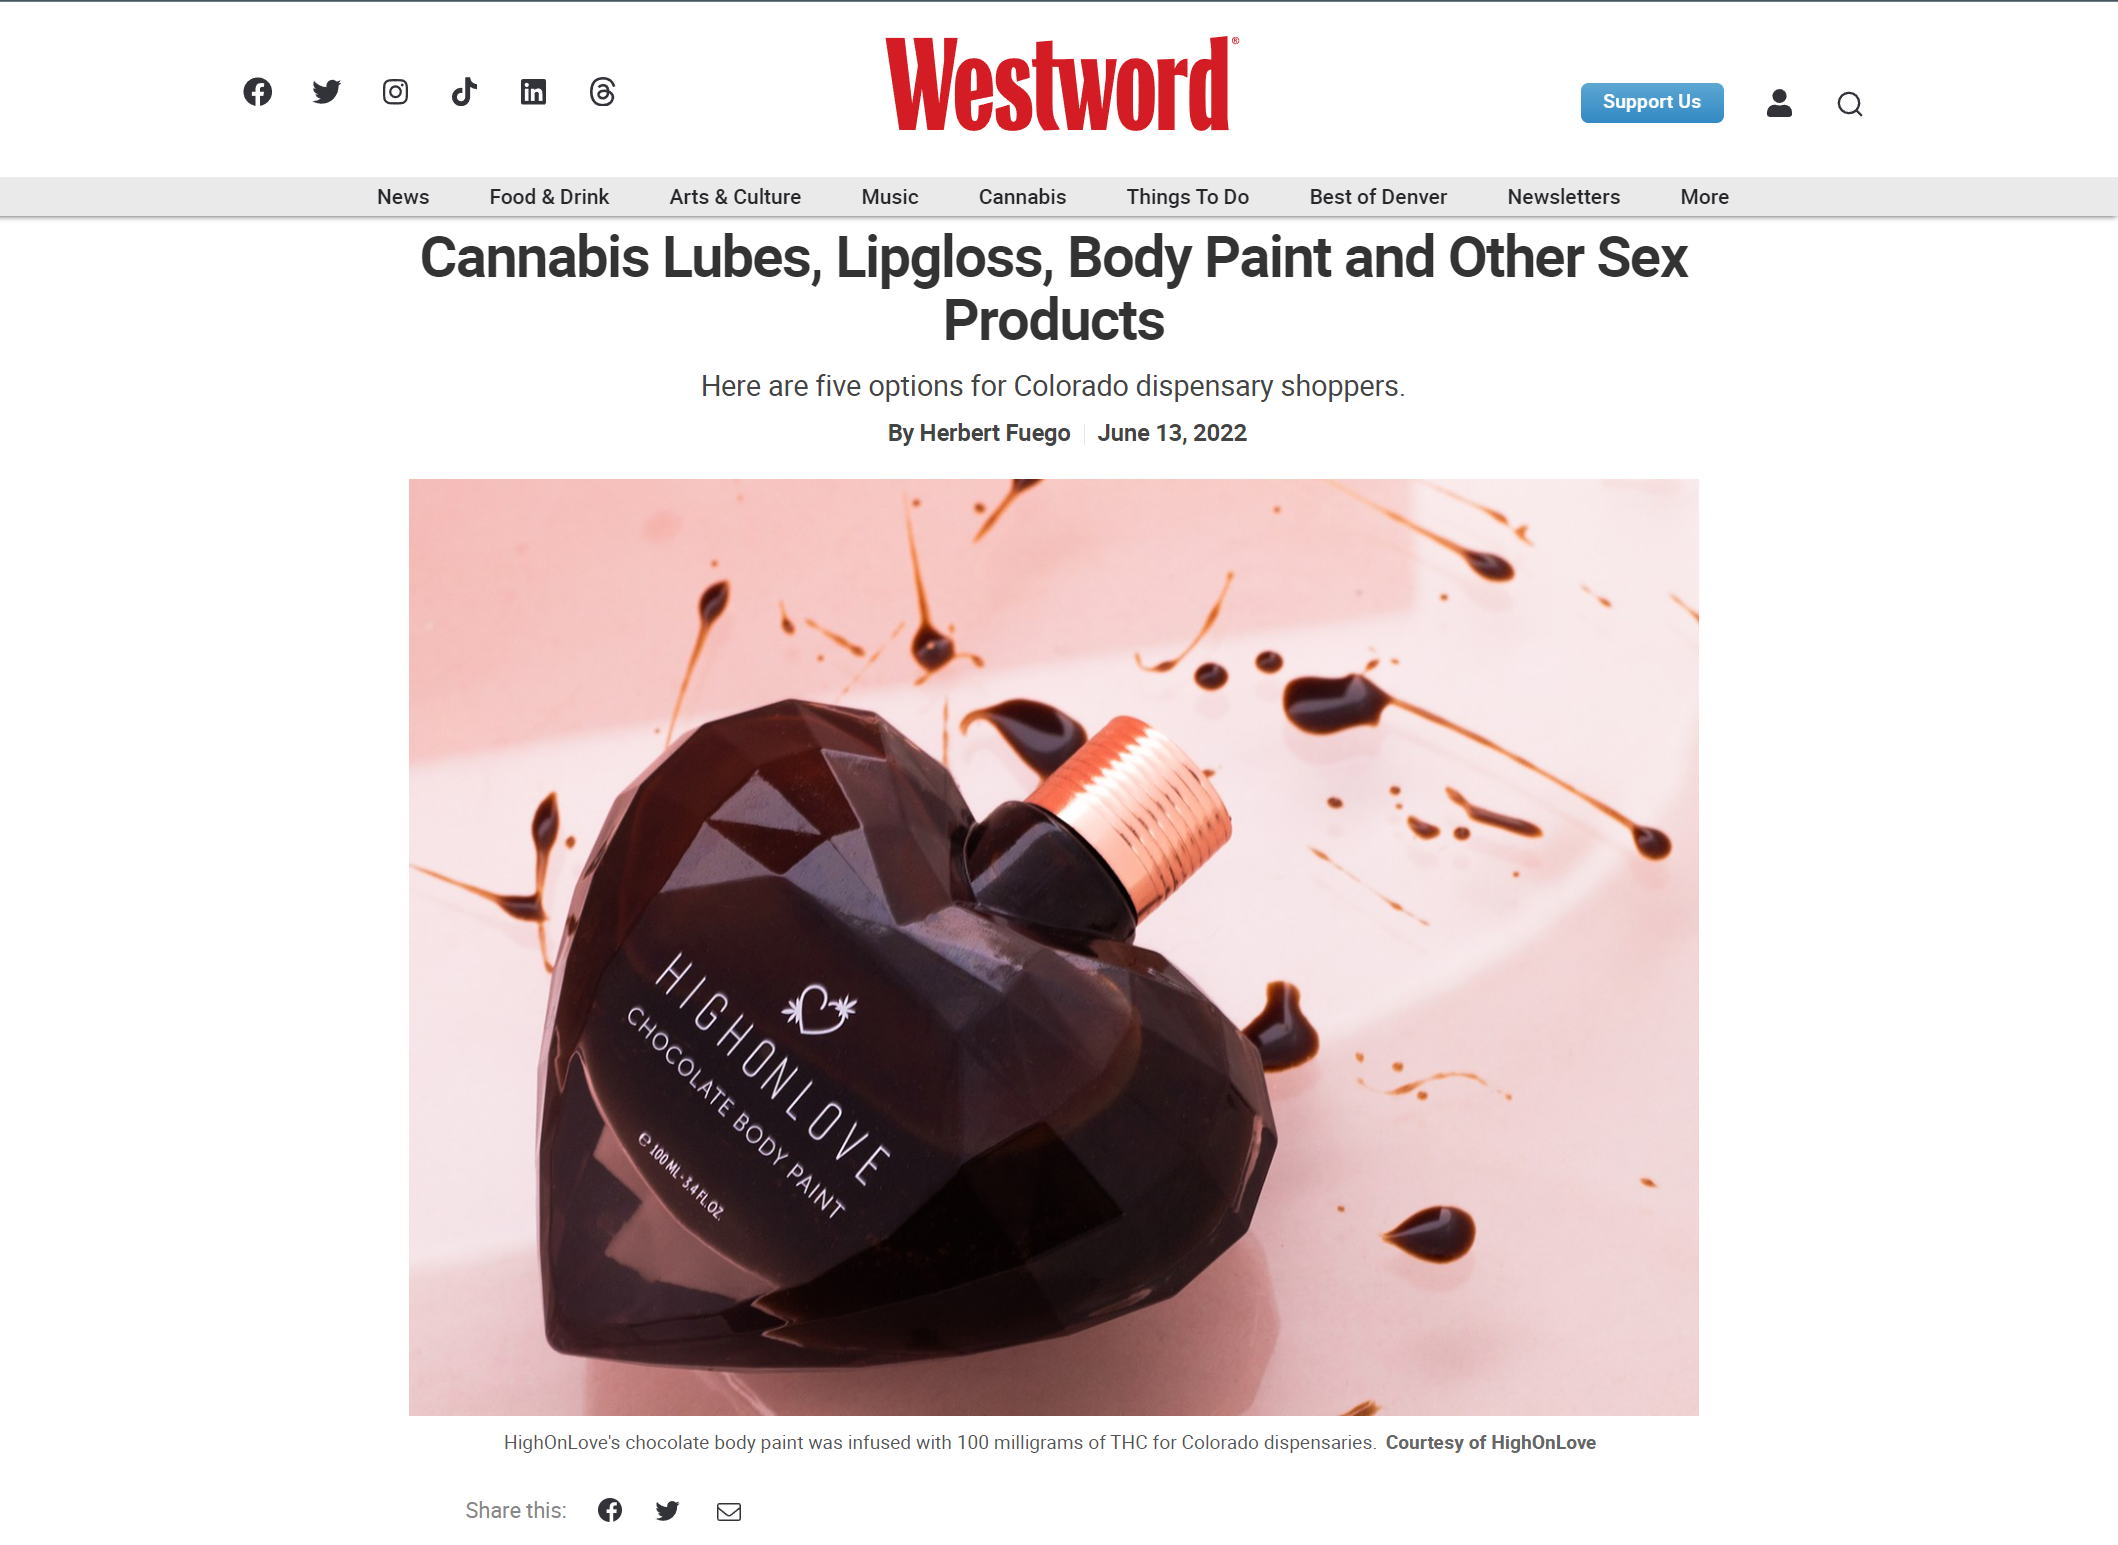 Cannabis Lubes, Lipgloss, Body Paint